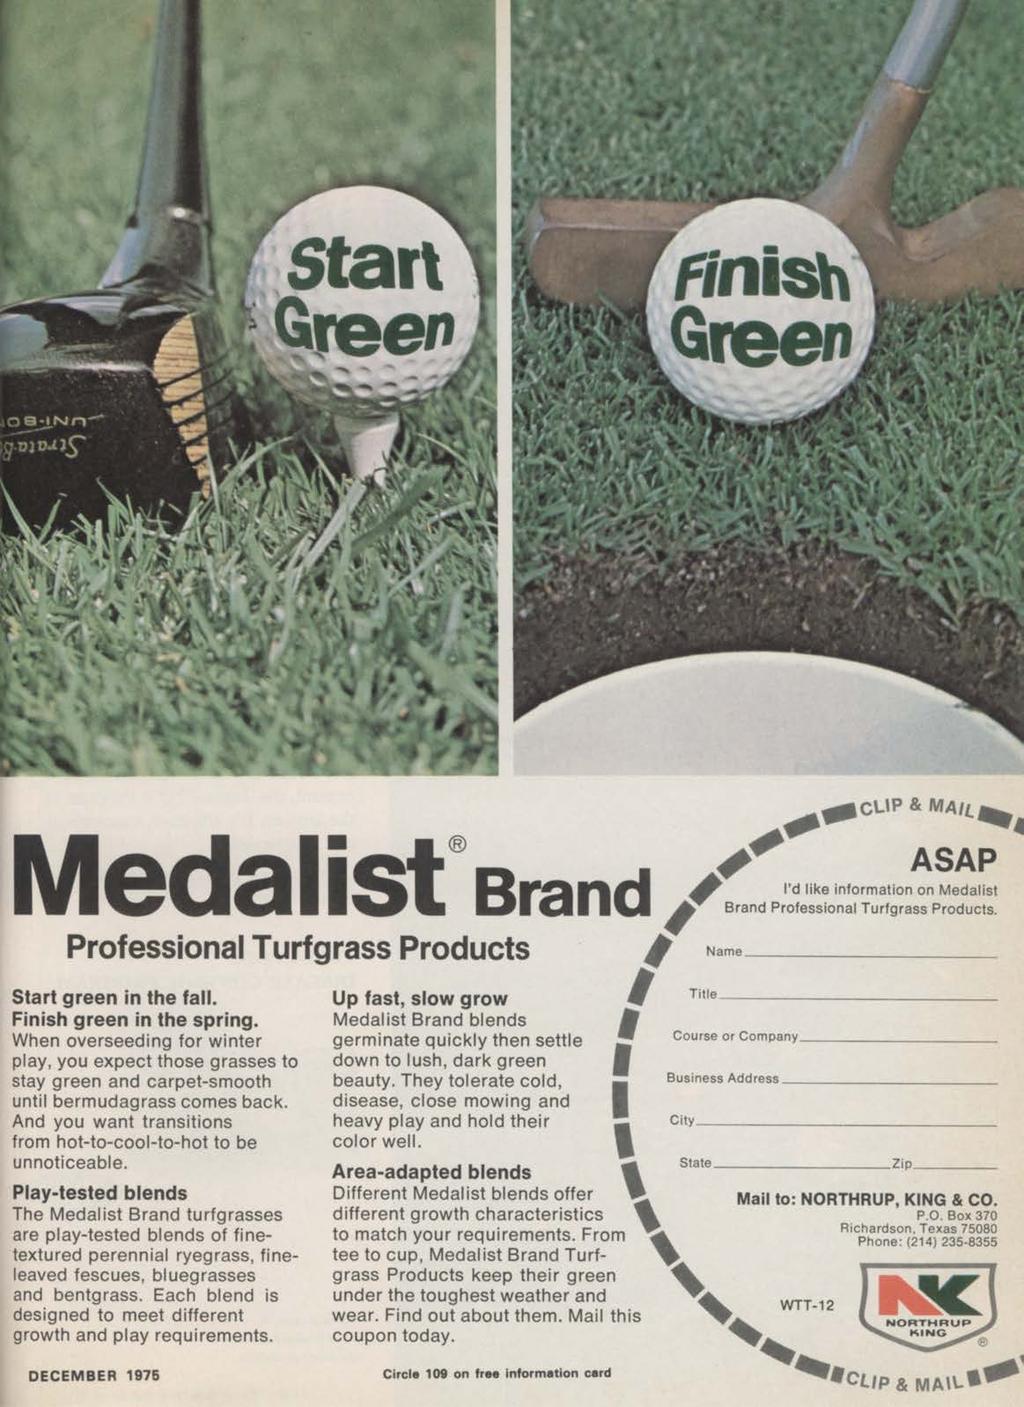 Medalist Brand Professional Turfgrass Products Name. ^ c u p & mail ^ ASAP I'd like information on Medalist Professional Turfgrass Products. Start green in the fall. Finish green in the spring.